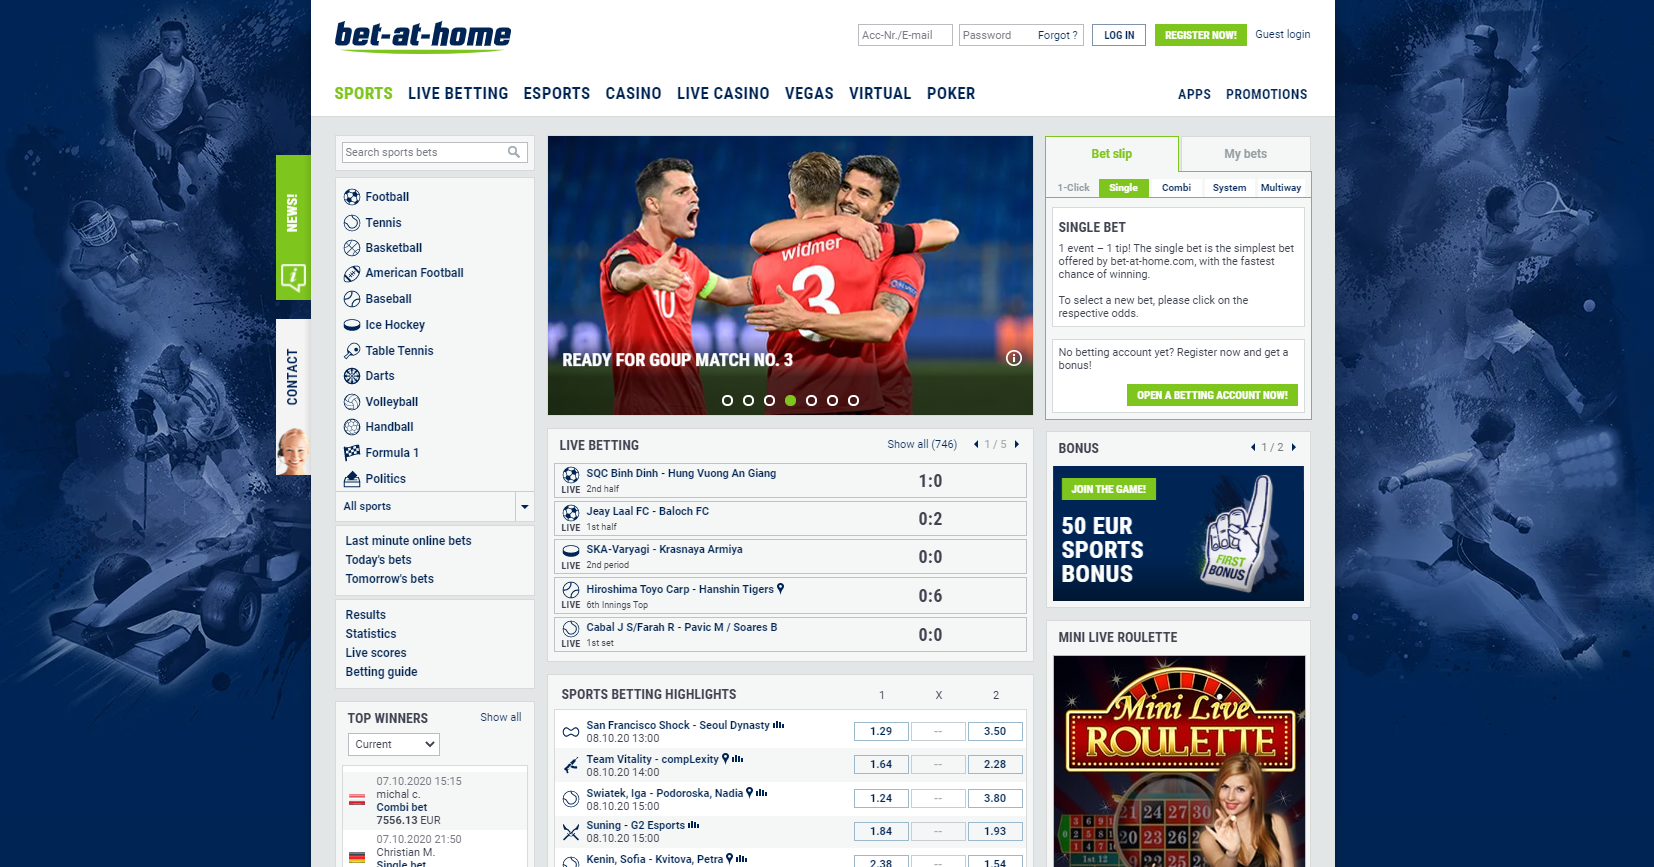 bookmaker bet-at-home sports betting offer